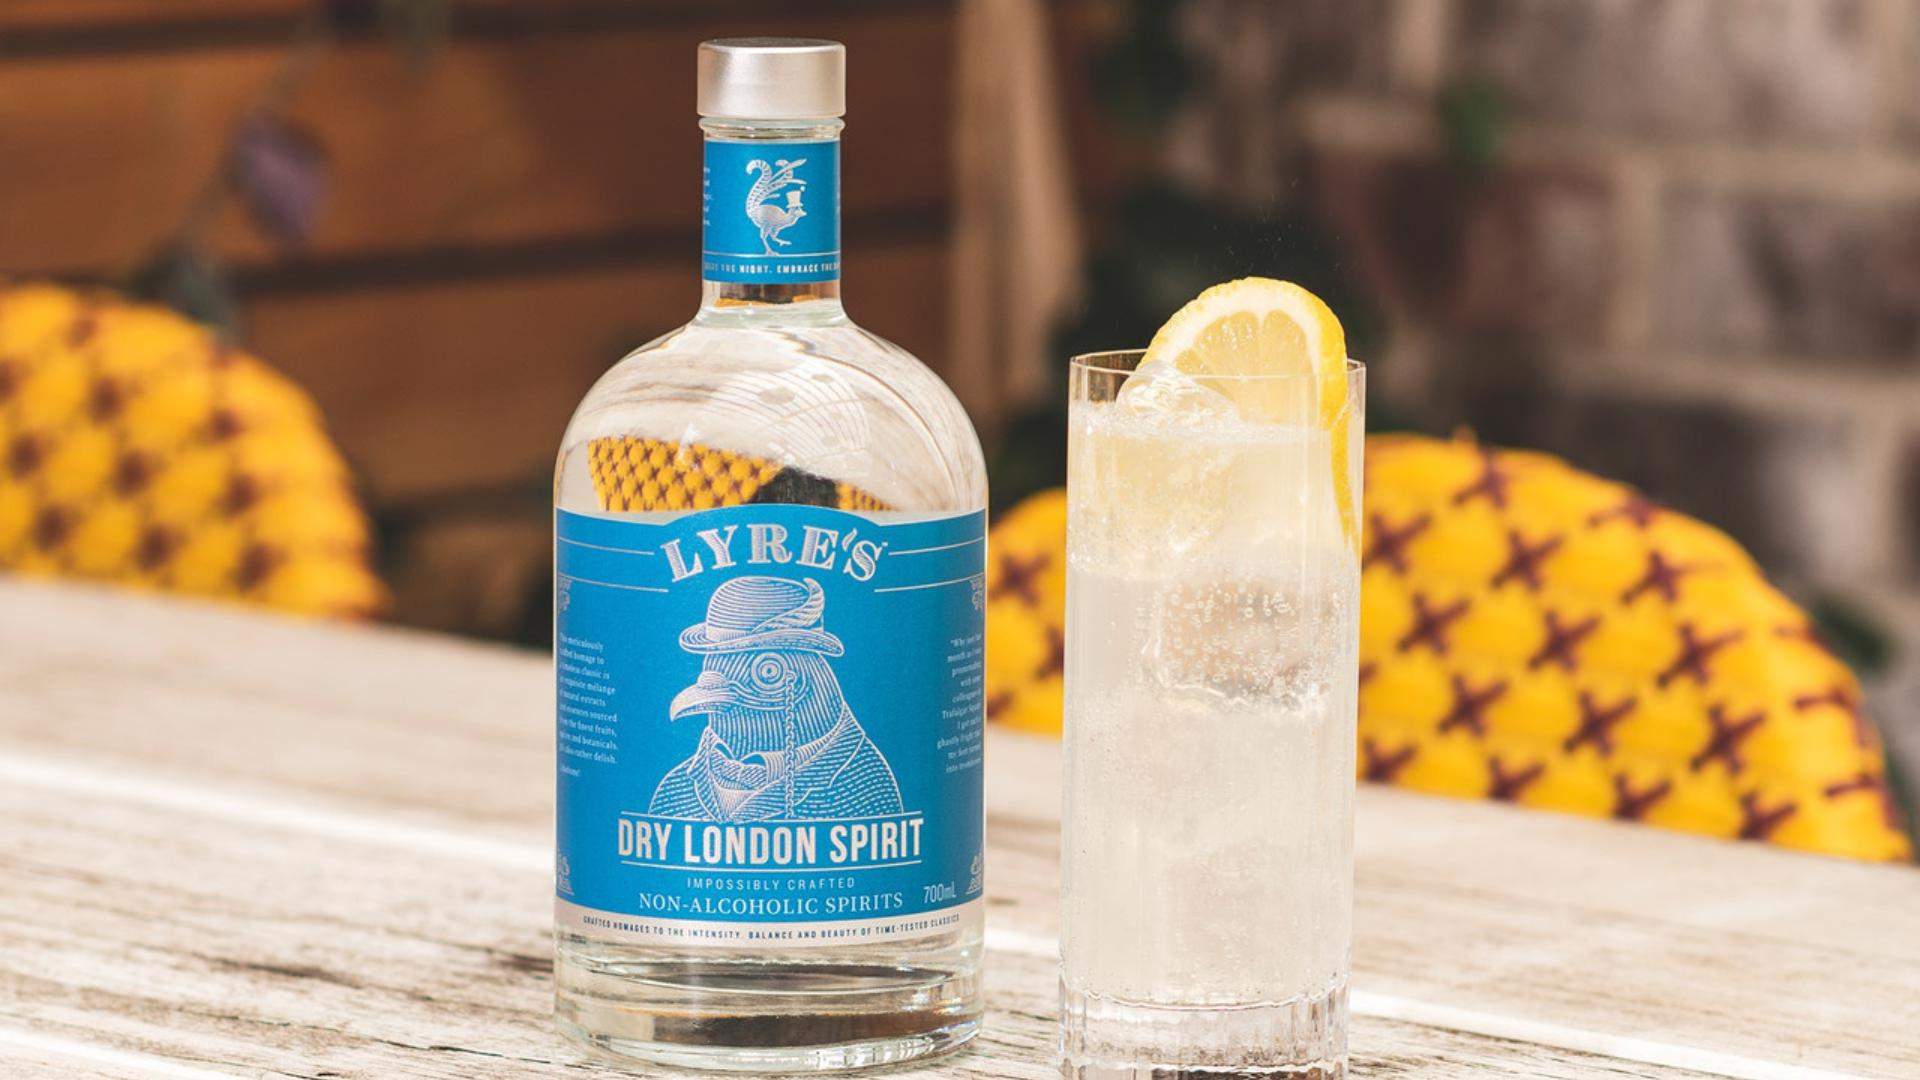 Bottle of Dry London Spirit next to a G&T.